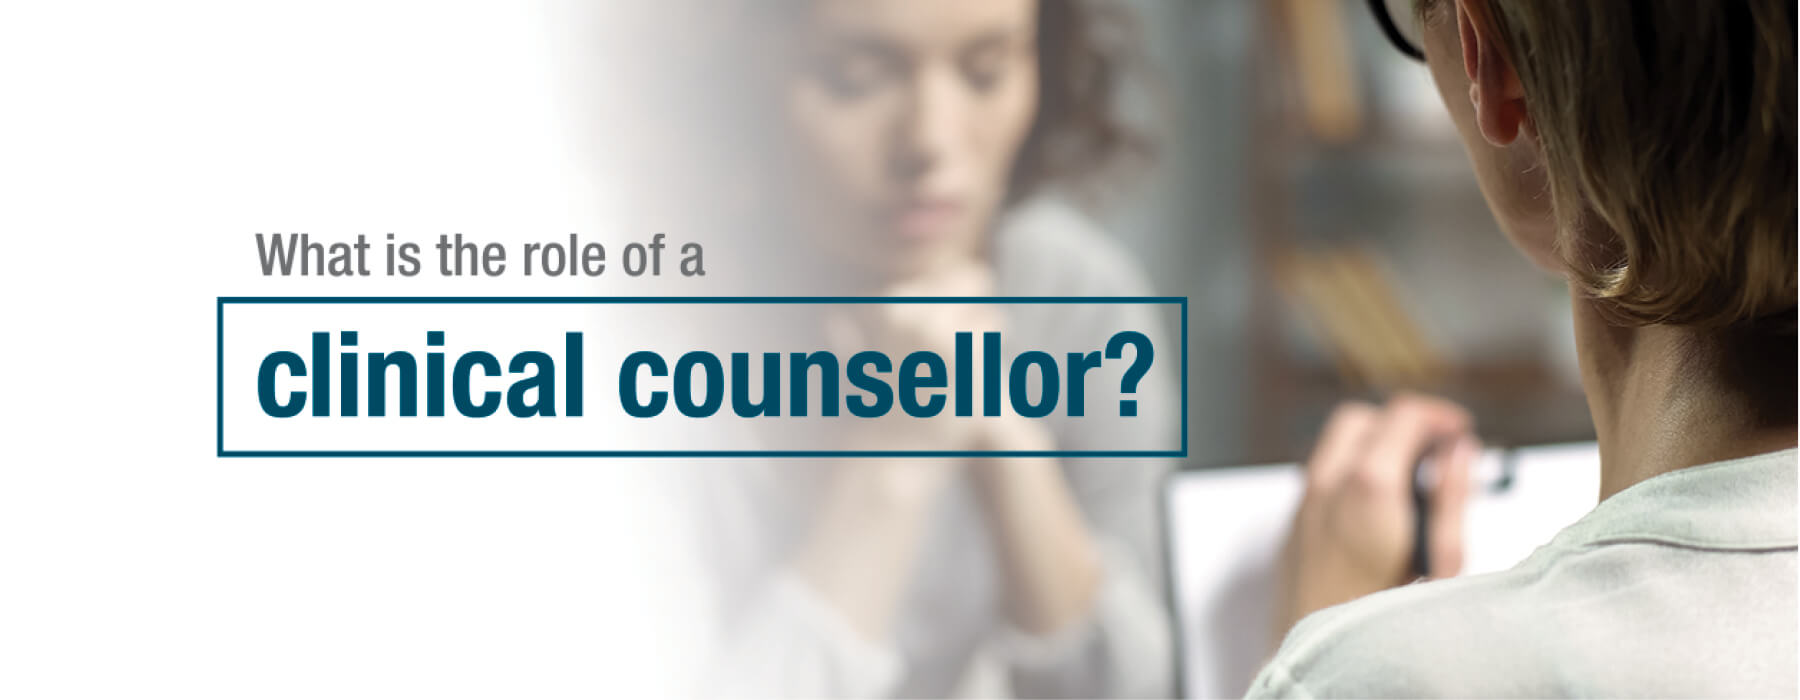 What is the role of a clinical counsellor?